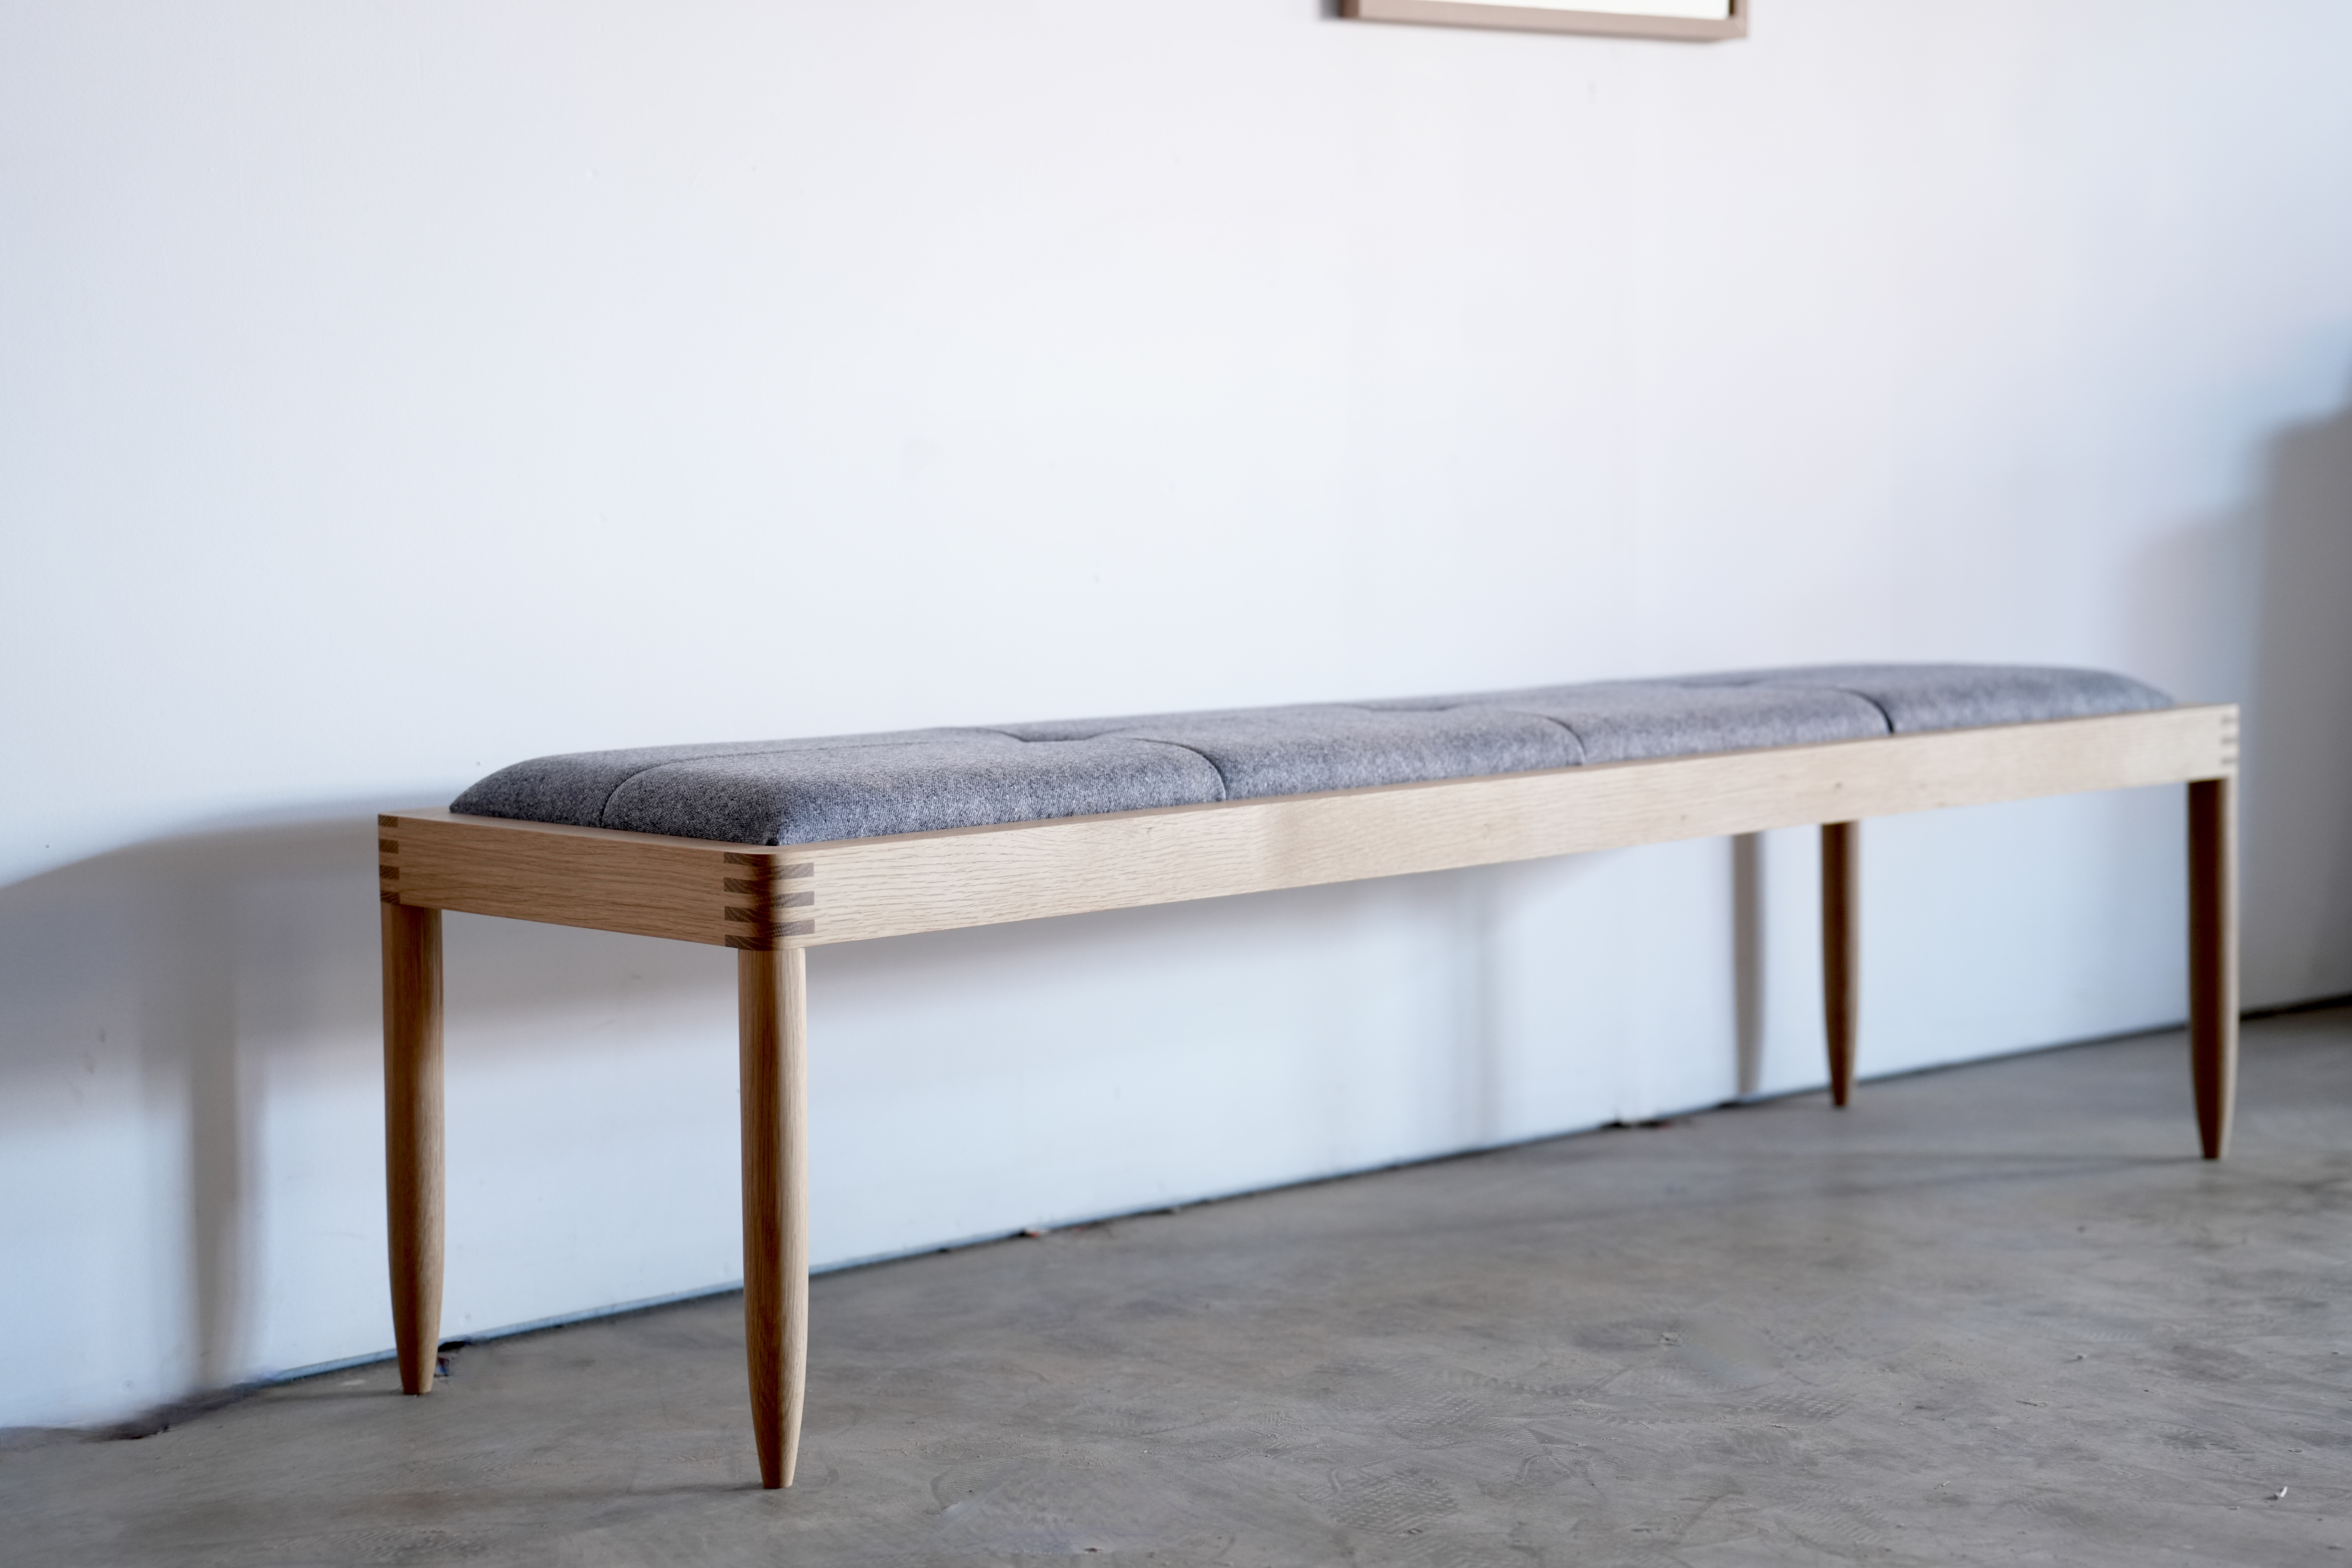 A simple white oak bench with exposed finger joints and an upholstered gray wool top.